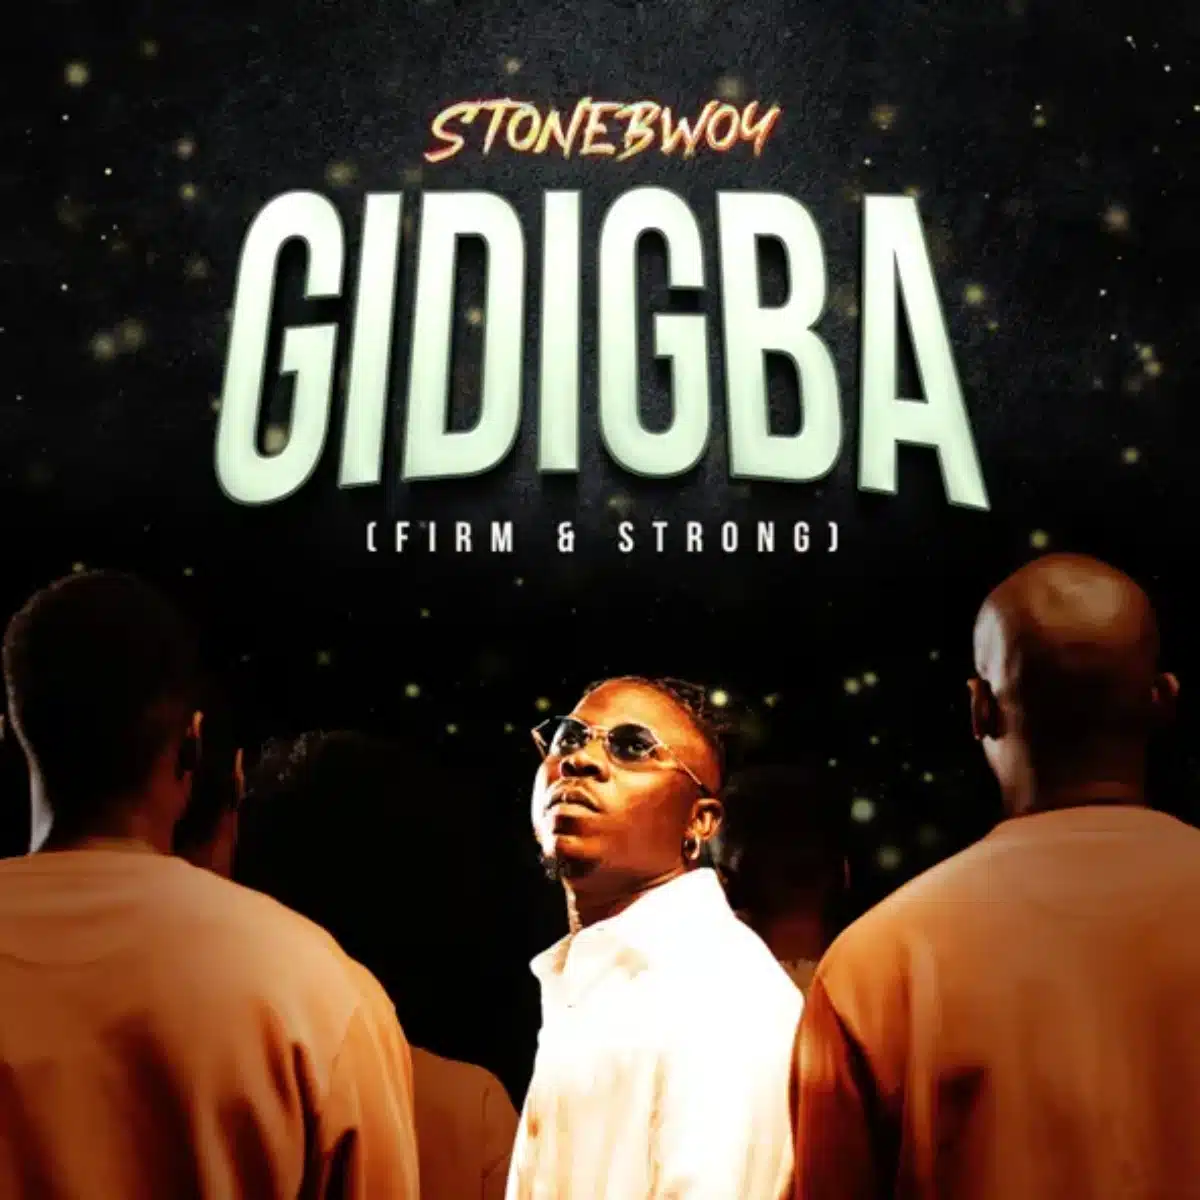 DOWNLOAD: Stonebwoy – “Gidigba” (Firm Strong) Mp3